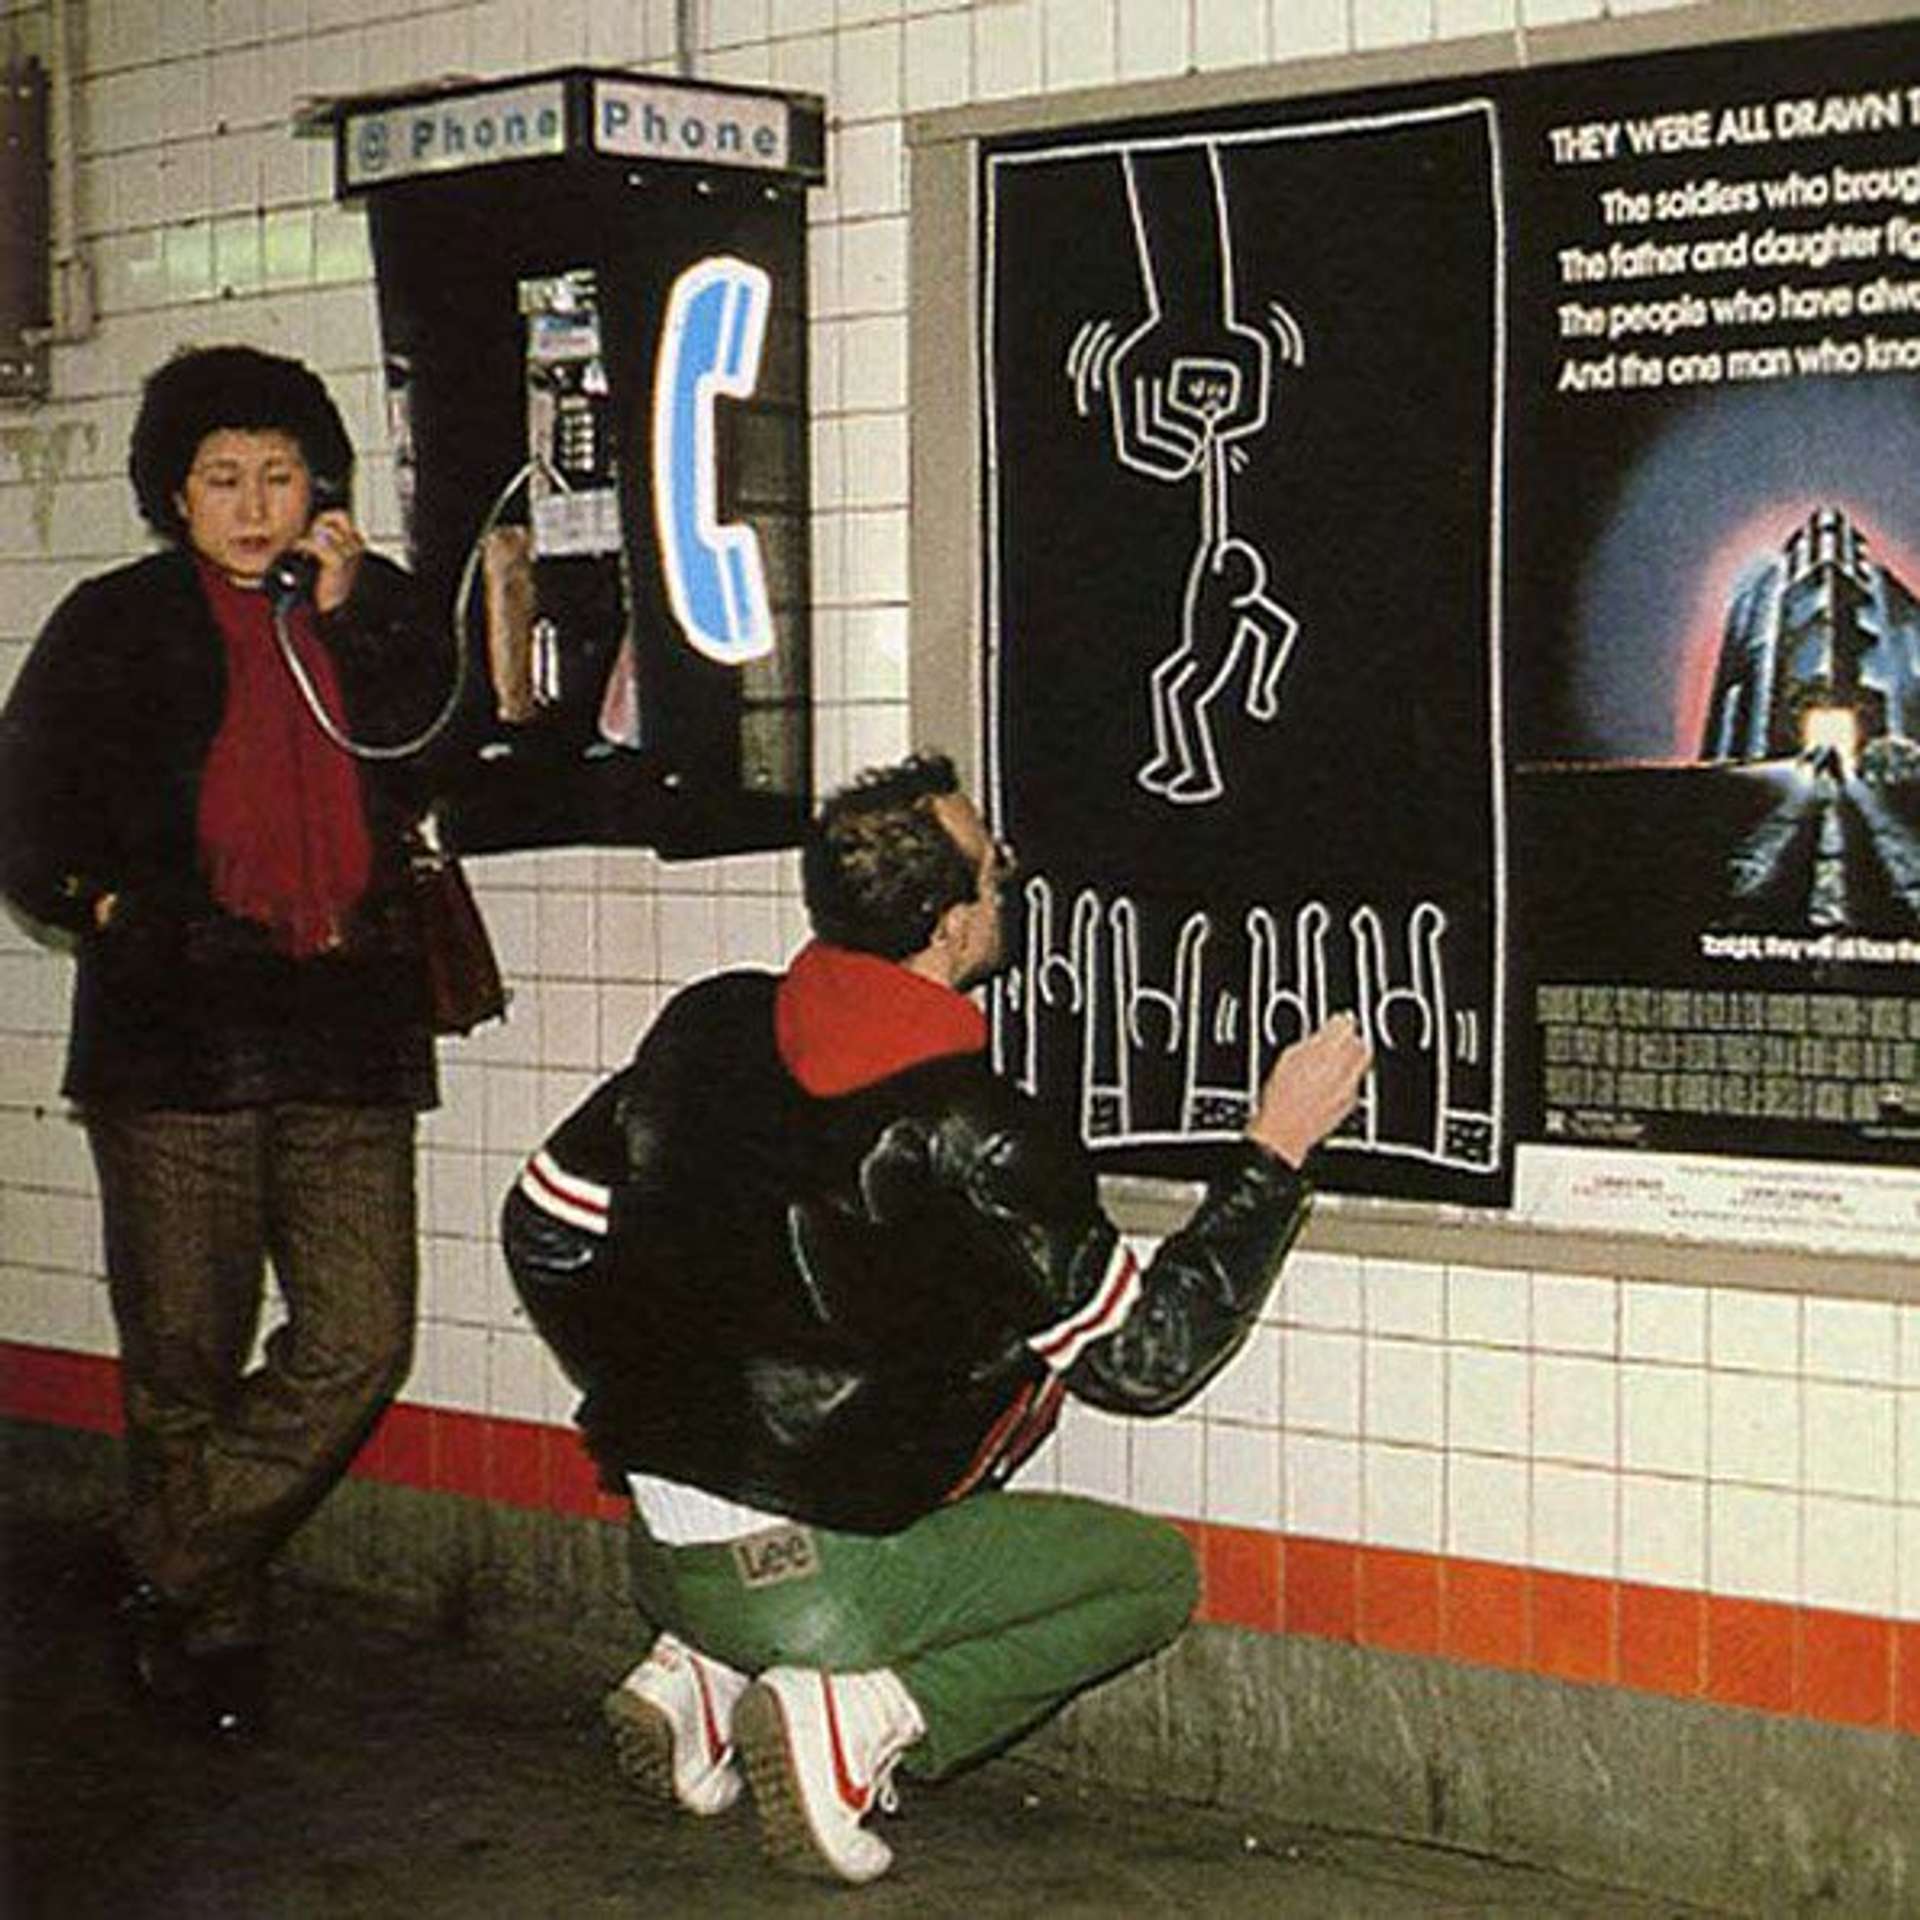 Keith in the Subway